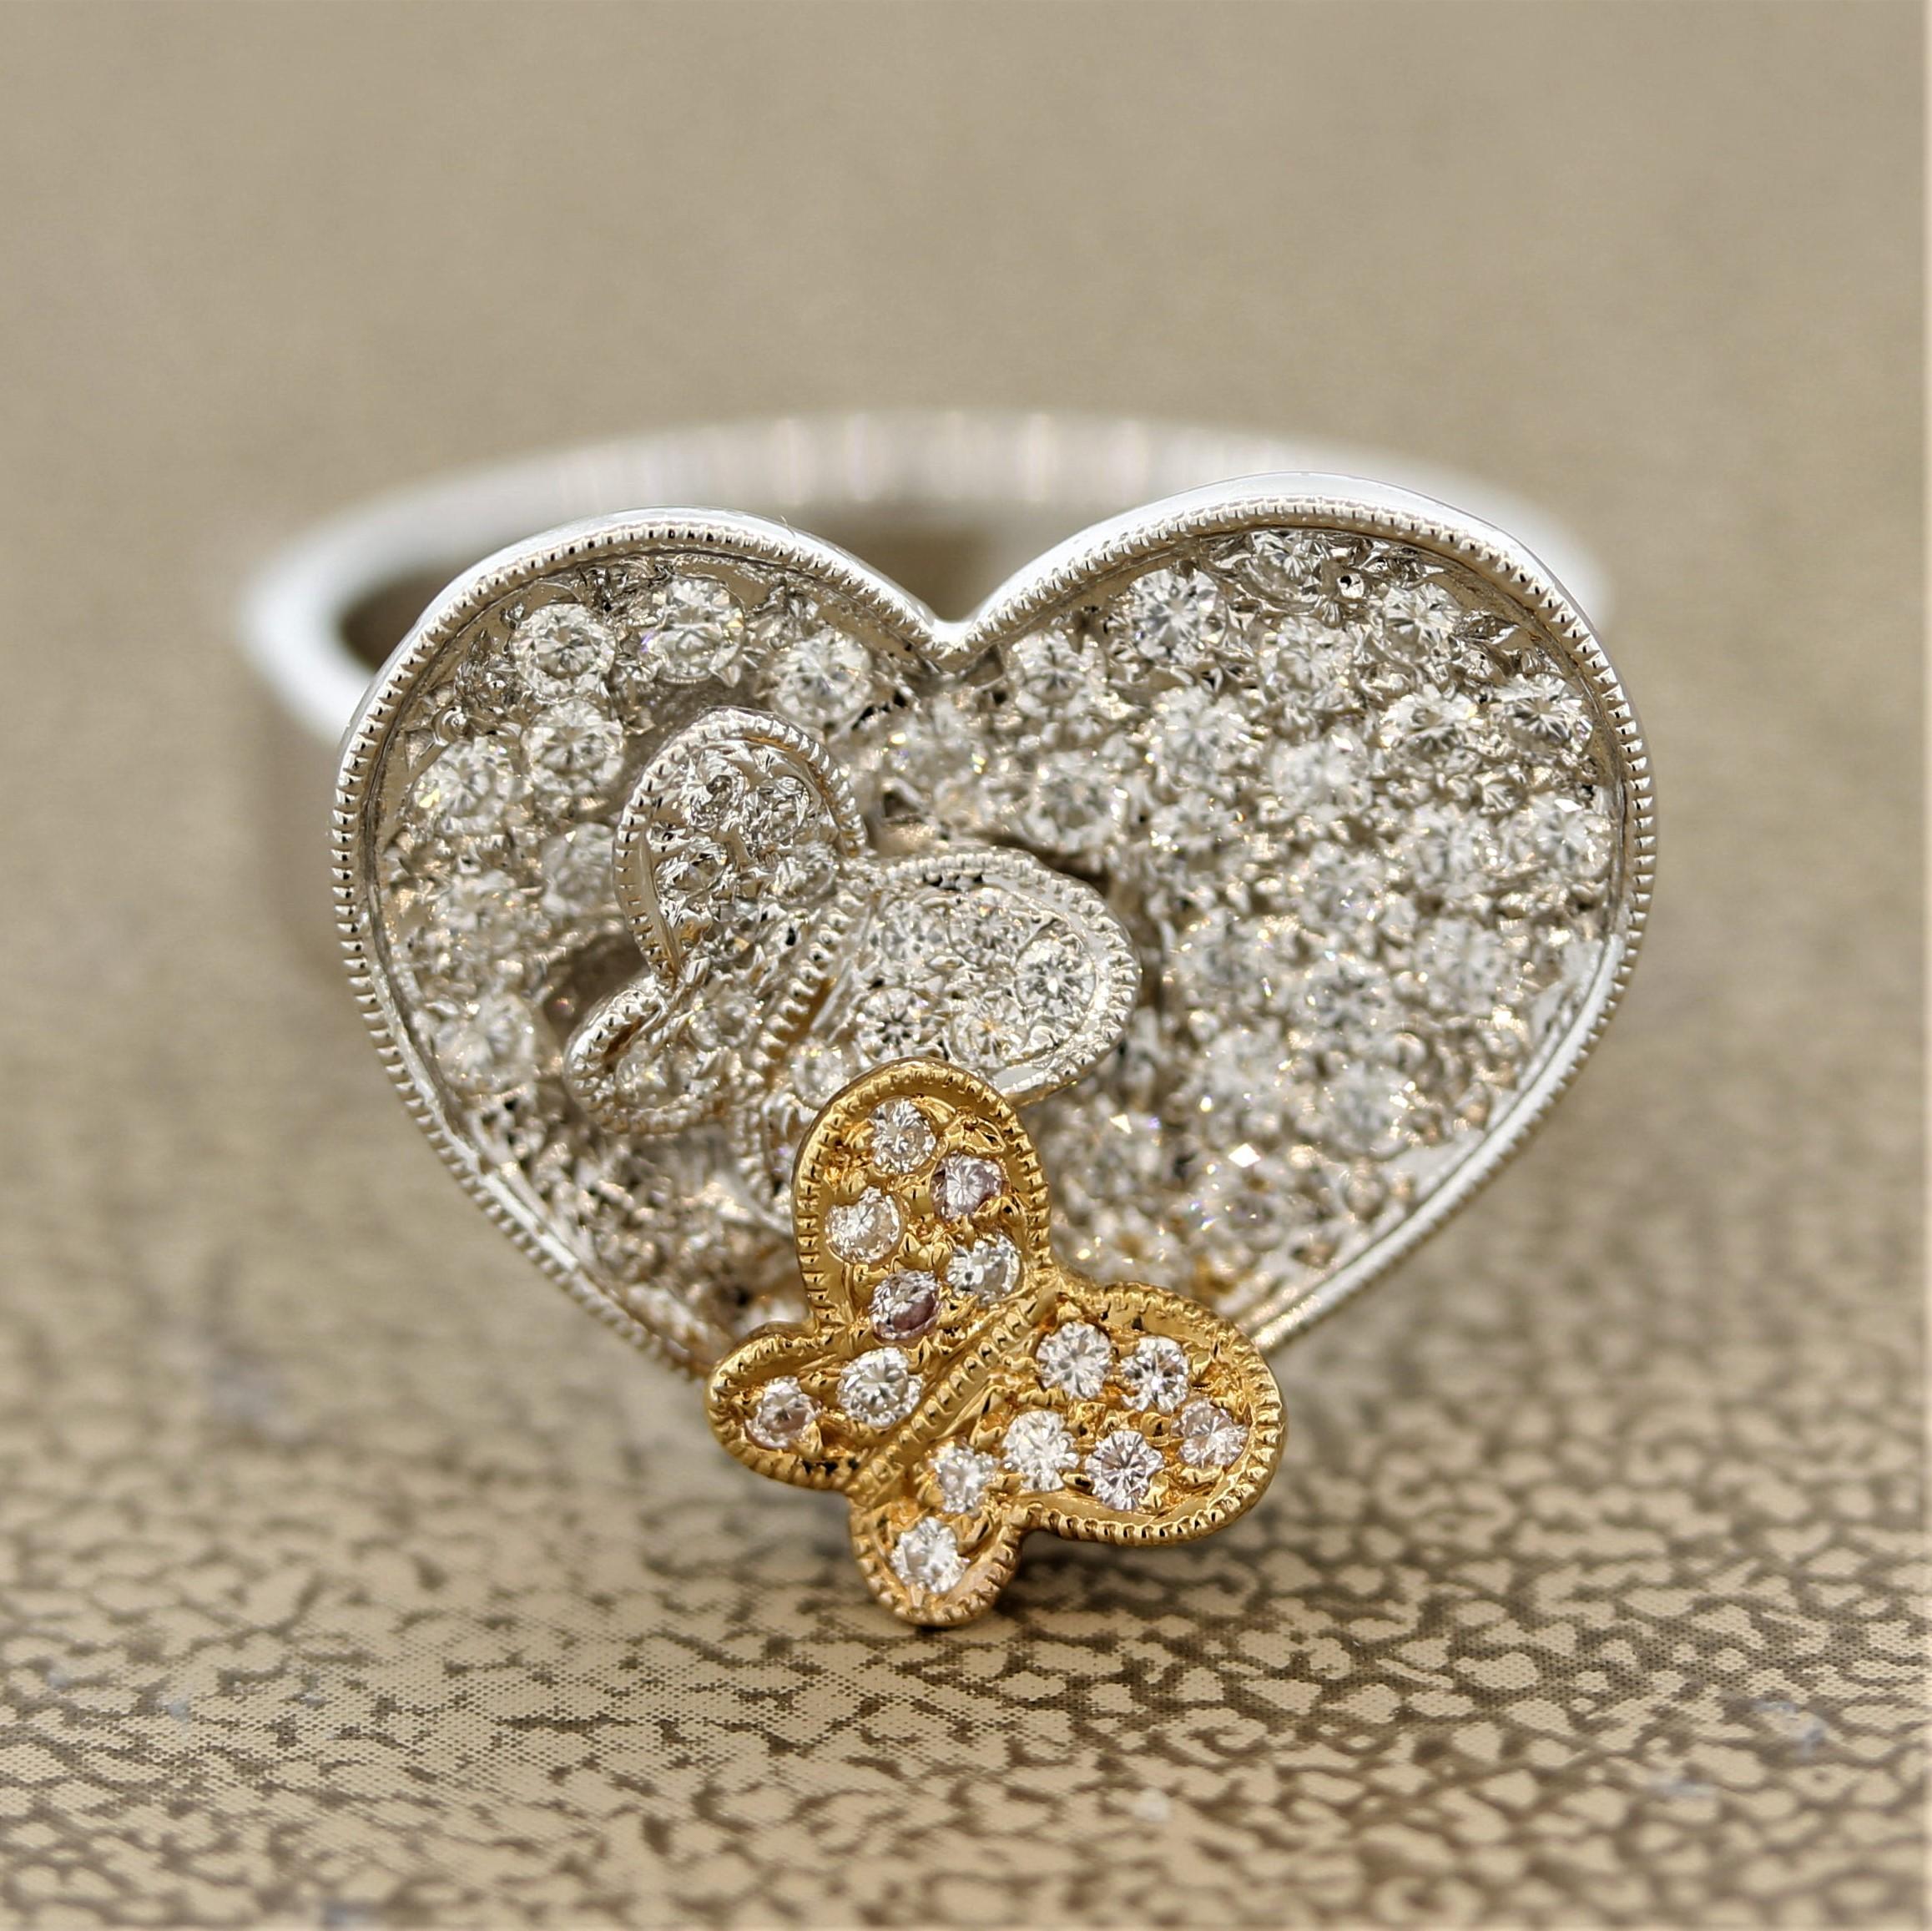 A sweet ring featuring 2 butterflies over a heart of love! They are set with 0.59 carats of round brilliant cut diamonds. One of the two butterflies is made in 18k rose gold while the other is made in 18k white gold along with the heart and rest of